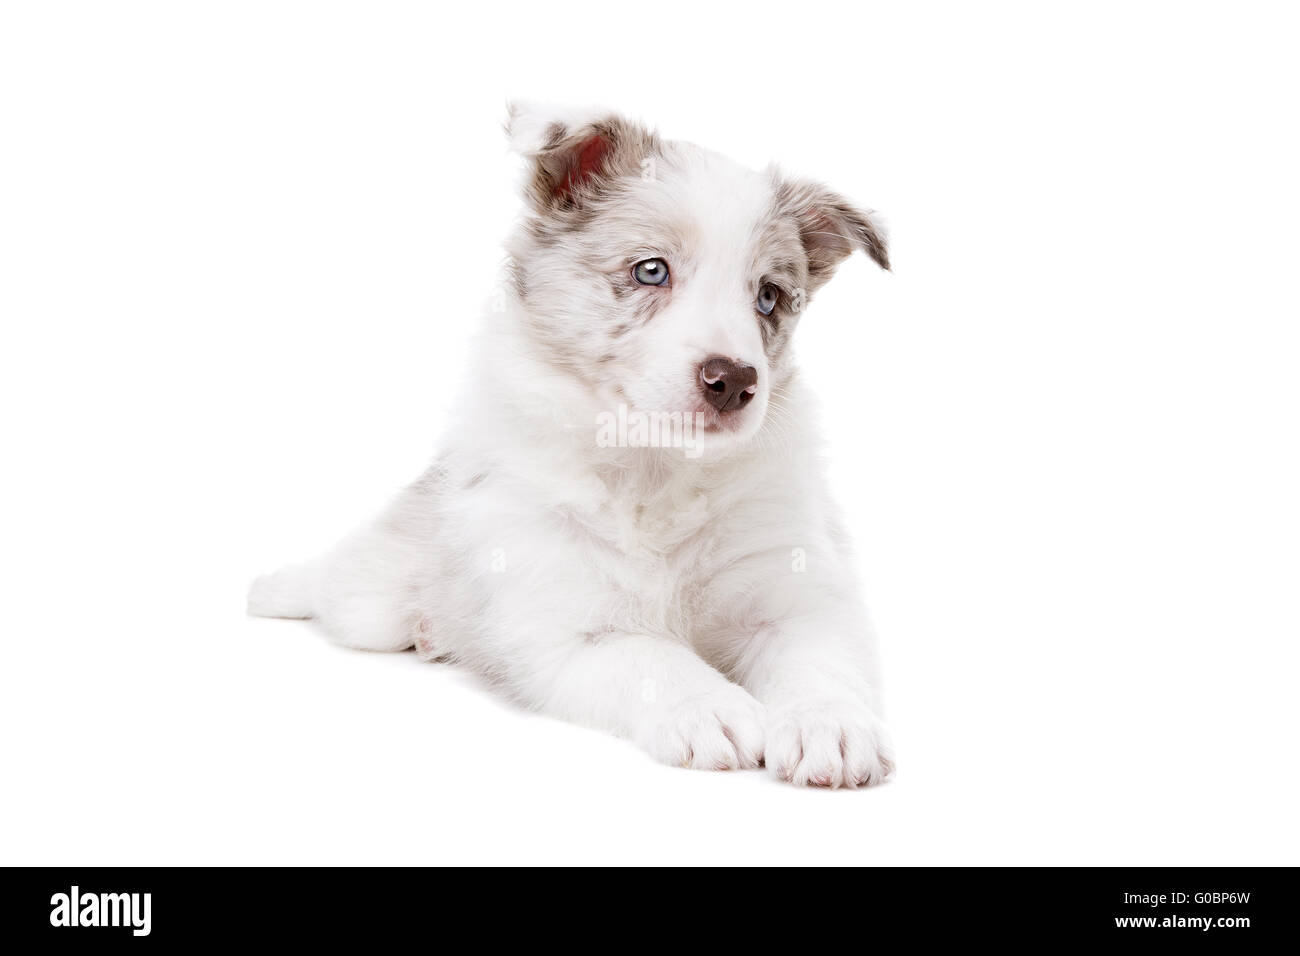 Border Collie puppy dog in front of a white background Stock Photo